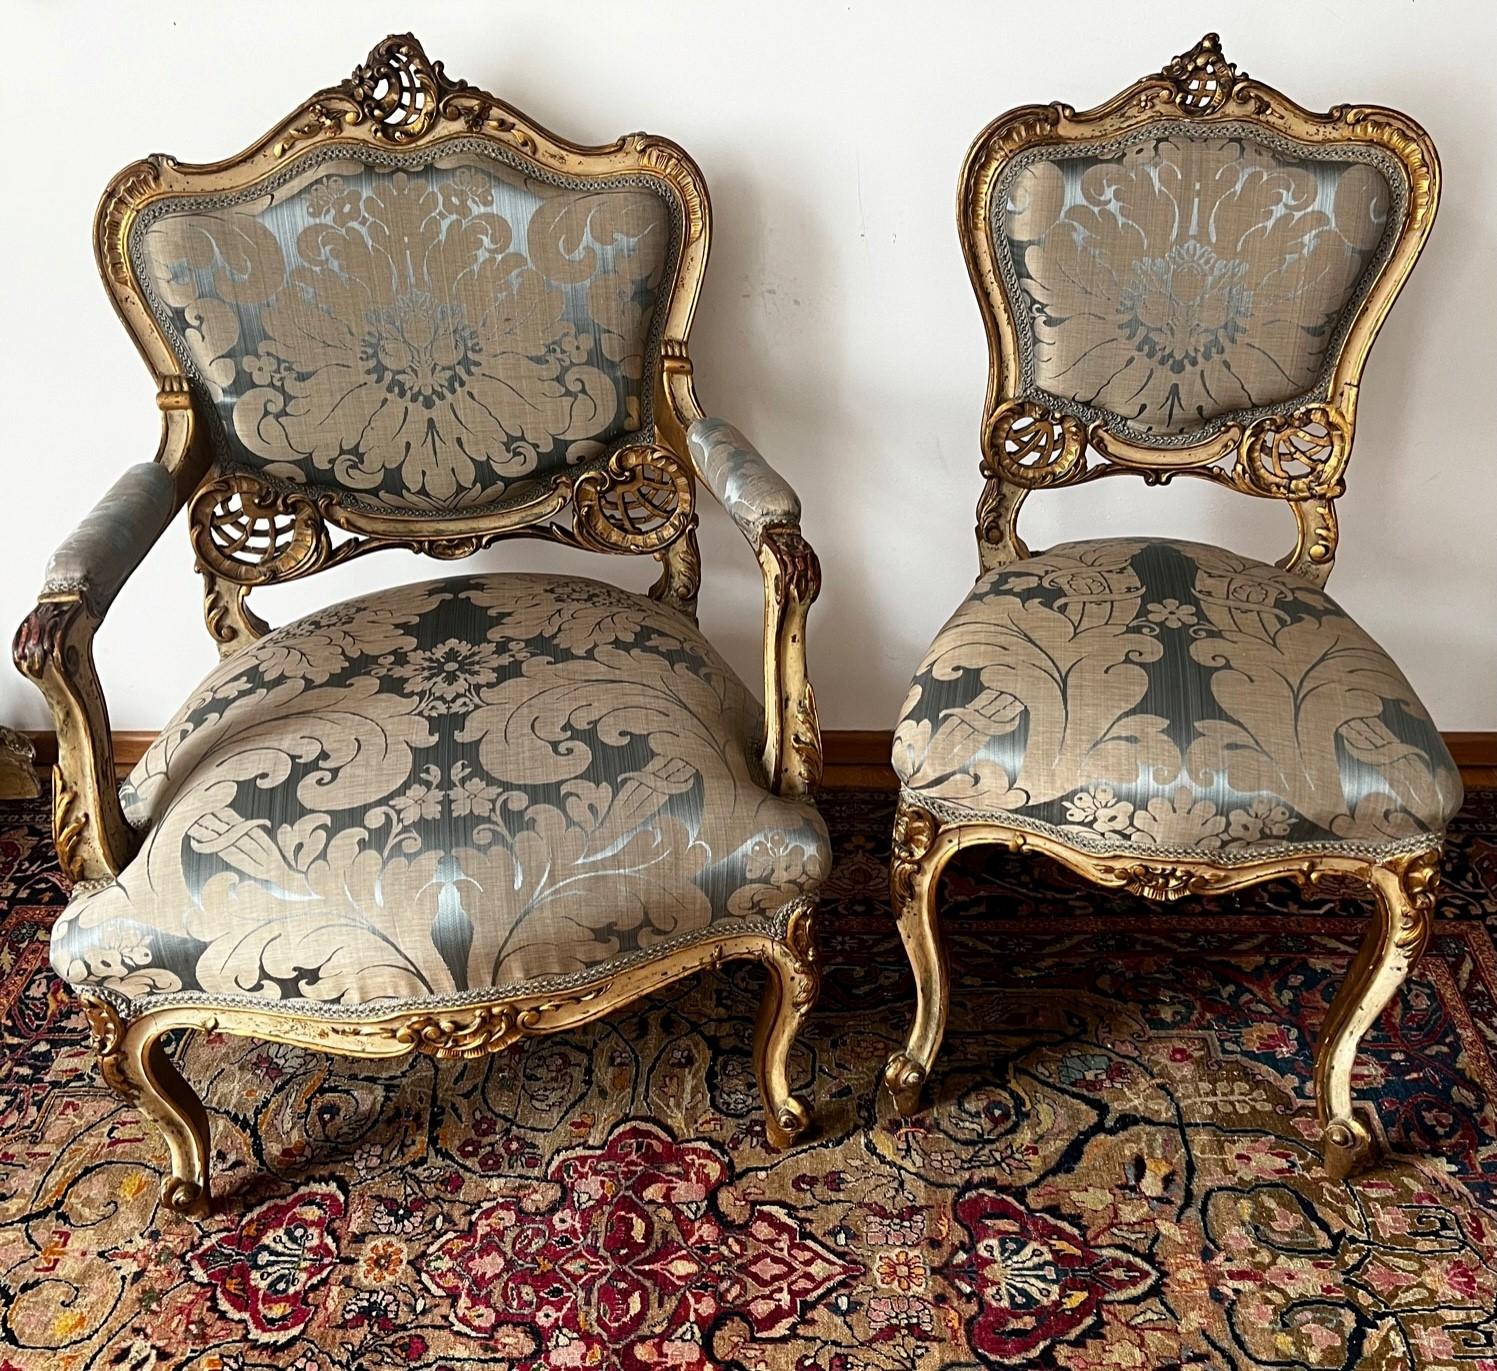 Extraordinary and exquisite set of original Louis XV salon gold gilded chairs with curved wood edges, intricately carved surfaces and Grey Green Patina. One Armchair and one Ladies Lounge chair are executed in the rococo style. They were part of